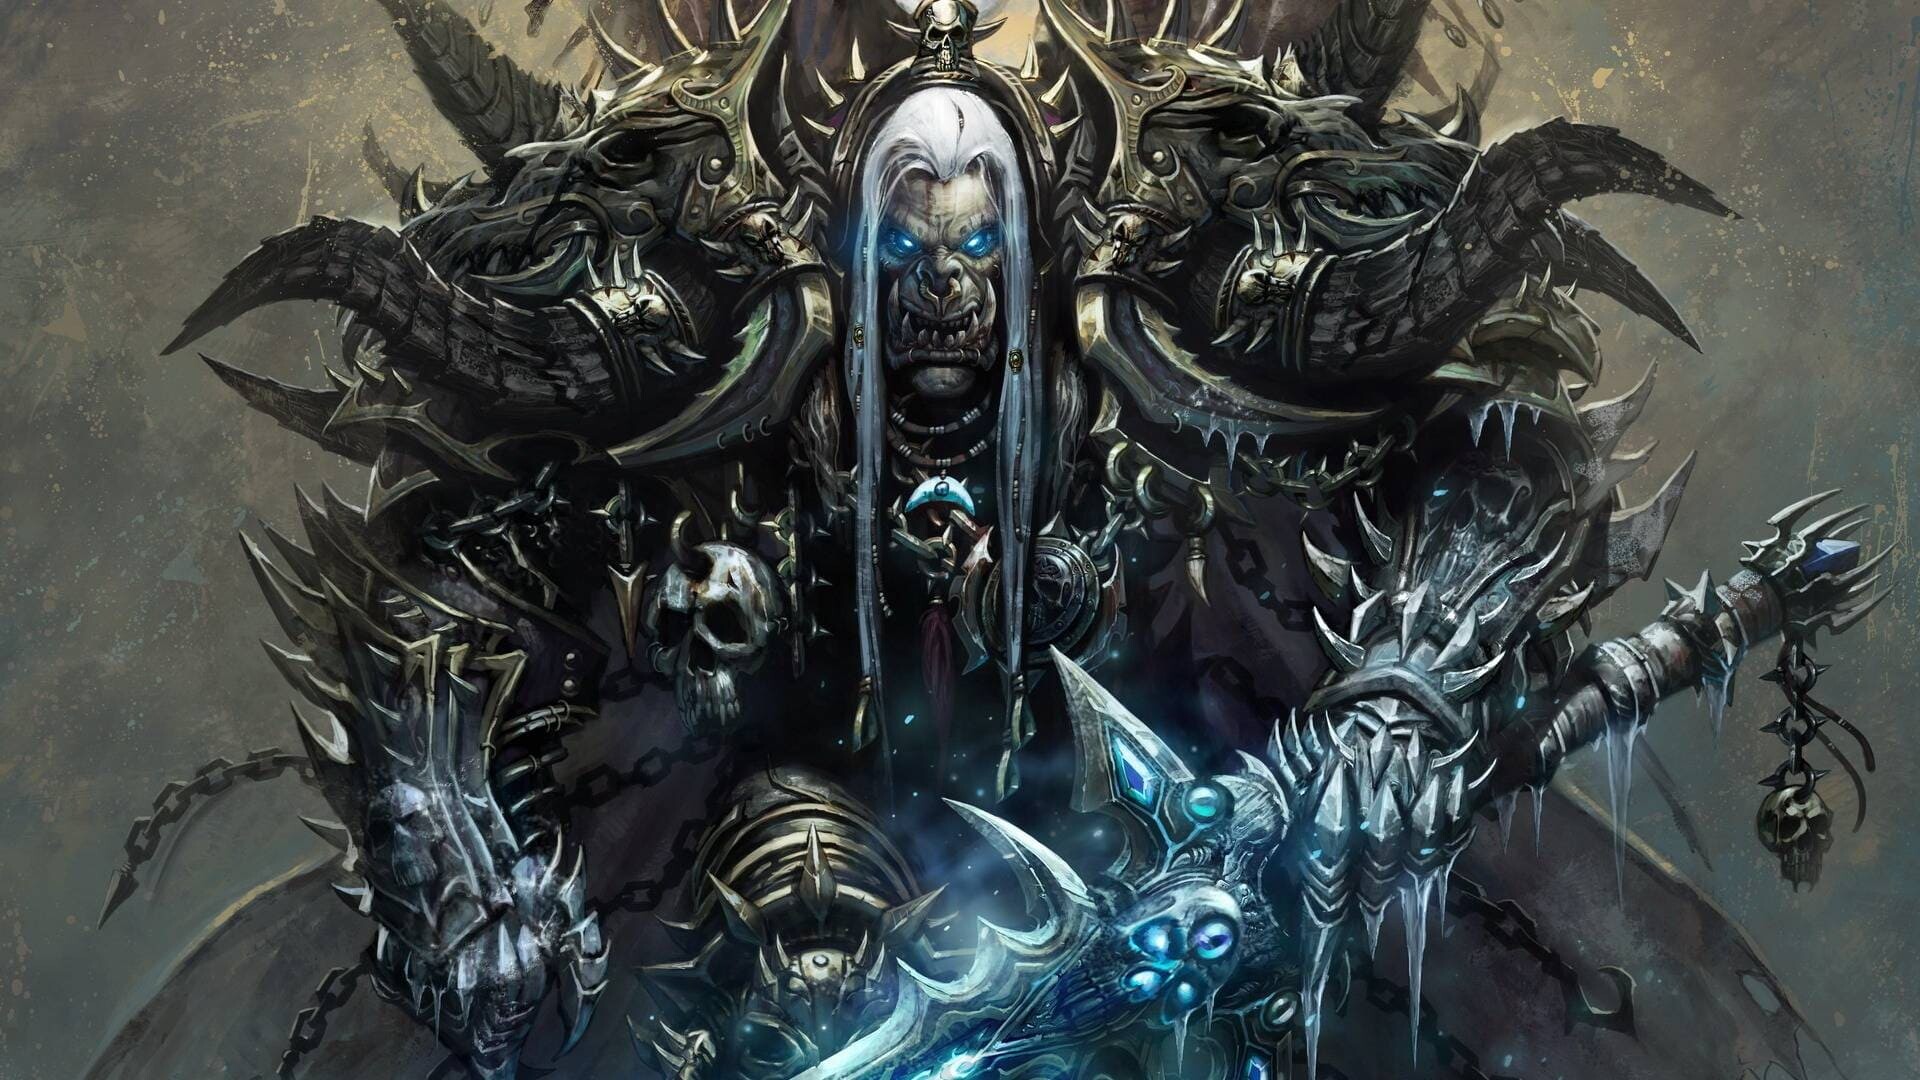 World of Warcraft: Ner'zhul, Warchief of Draenor, The Lich King. 1920x1080 Full HD Wallpaper.